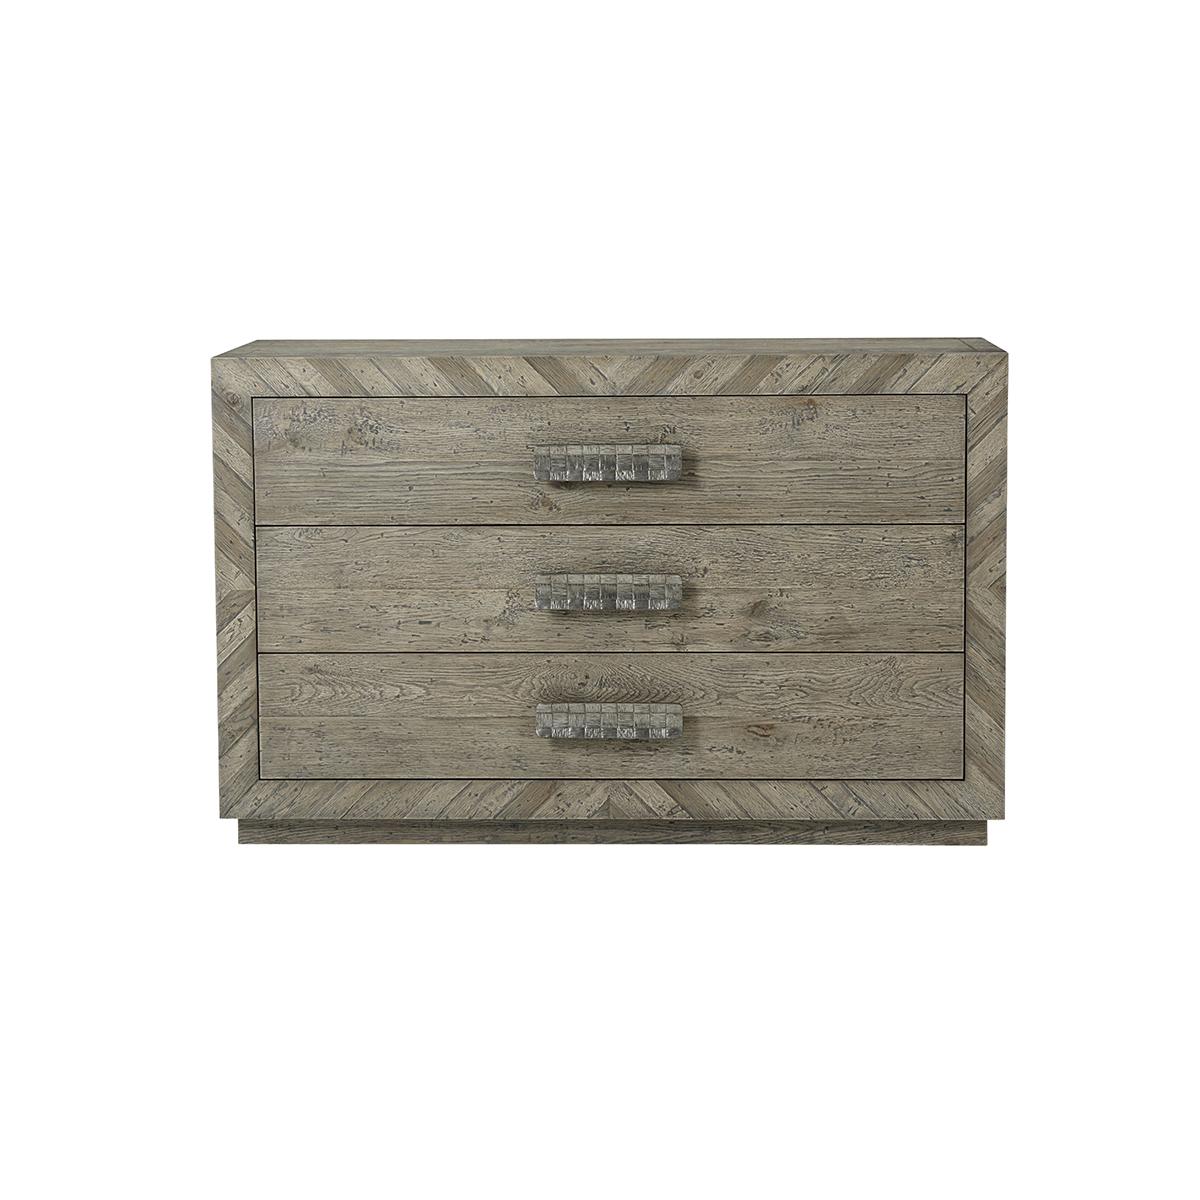 With three long drawers with a 'woven' cast vintage metal handle, a chevron parquetry inlaid frame and side panels also with vintage metal X details. In a greyed echo oak finish on a square plinth base.

Dimensions: 54